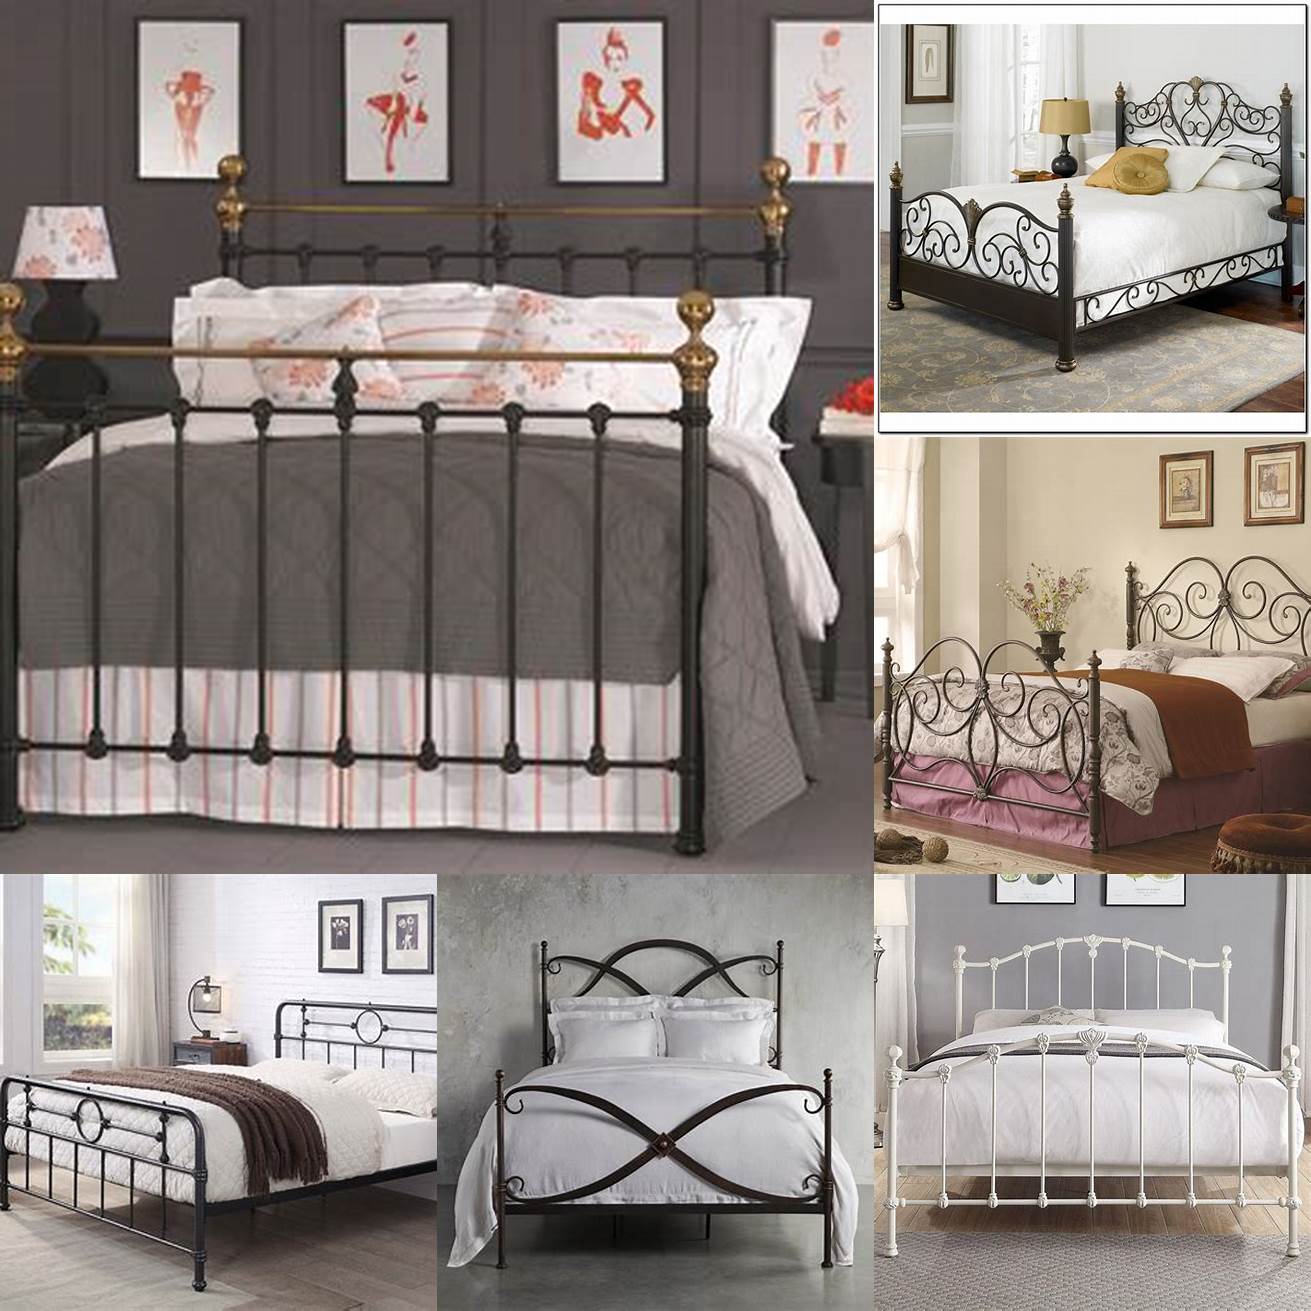 Aesthetics Iron bed frames have a timeless and elegant look that can add sophistication to any bedroom